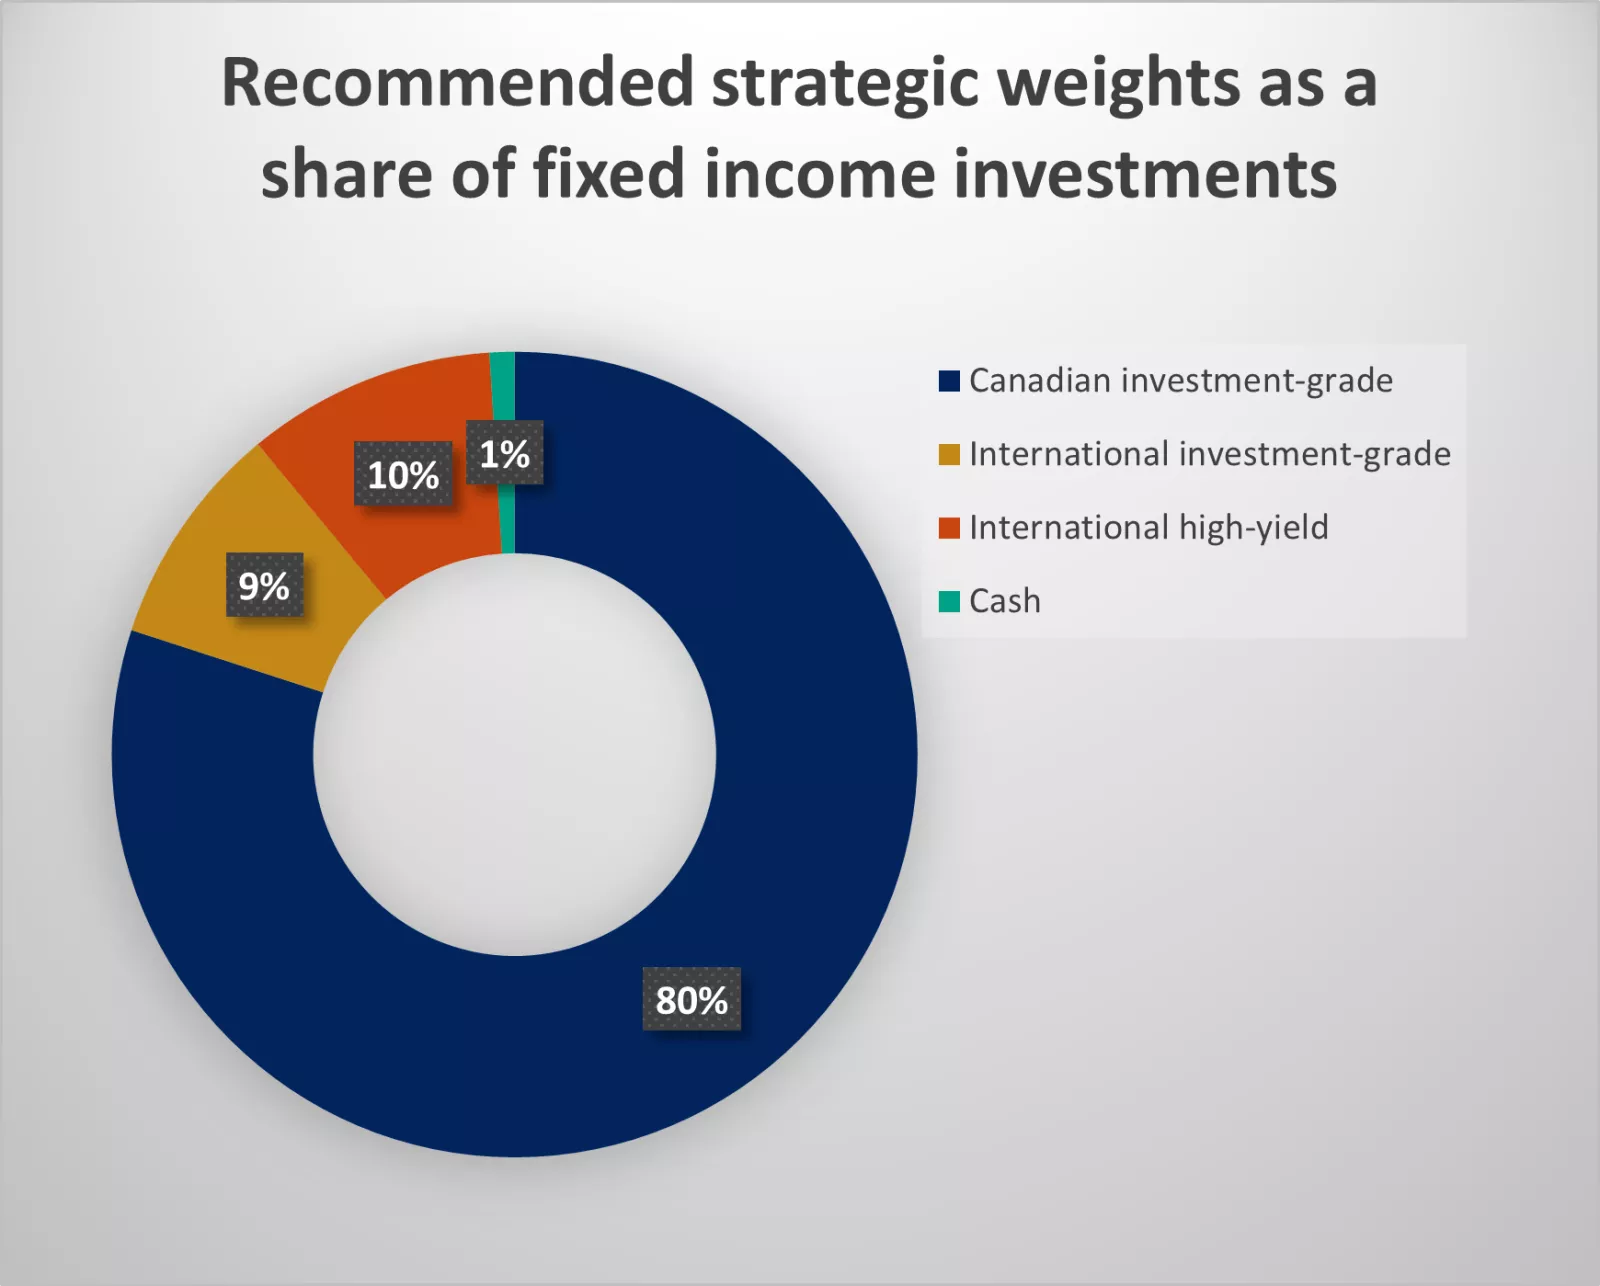 The graph shows the Edward Jones recommended strategic weights as a share of fixed income investments.